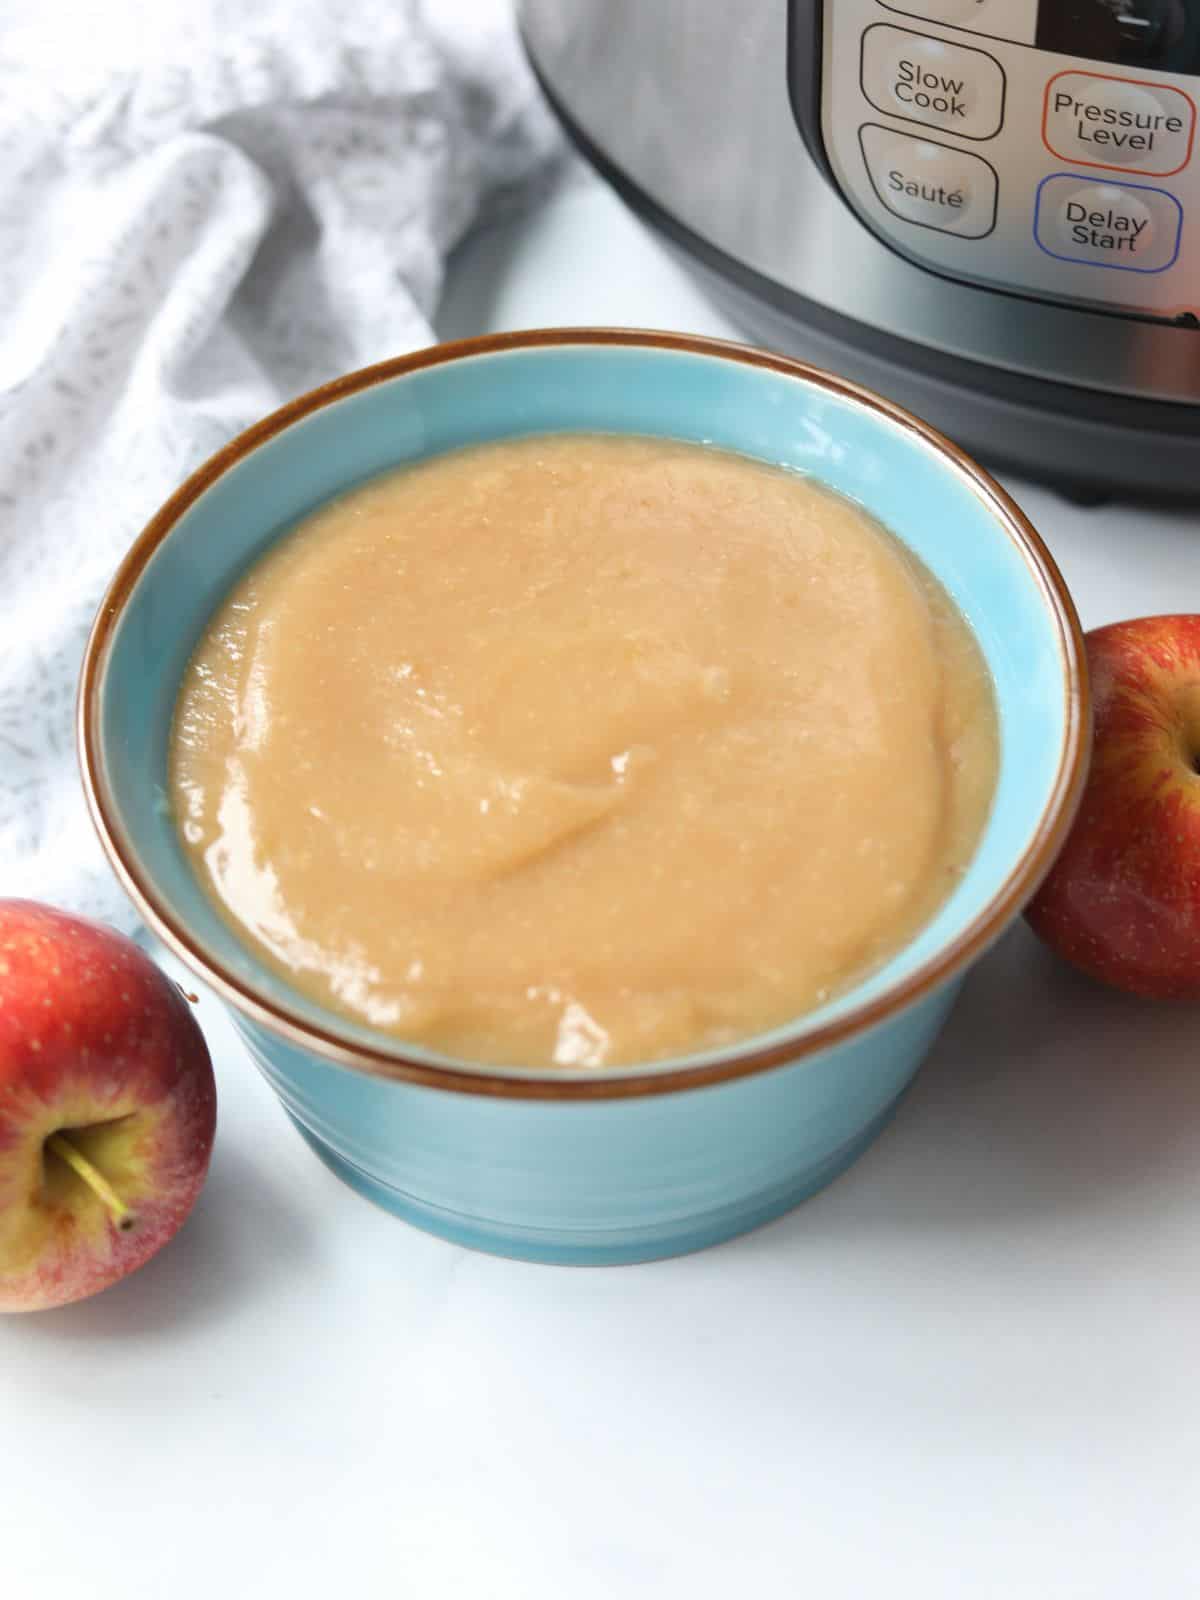 Instant Pot applesauce in blue bowl next to pressure cooker with apples in the background.